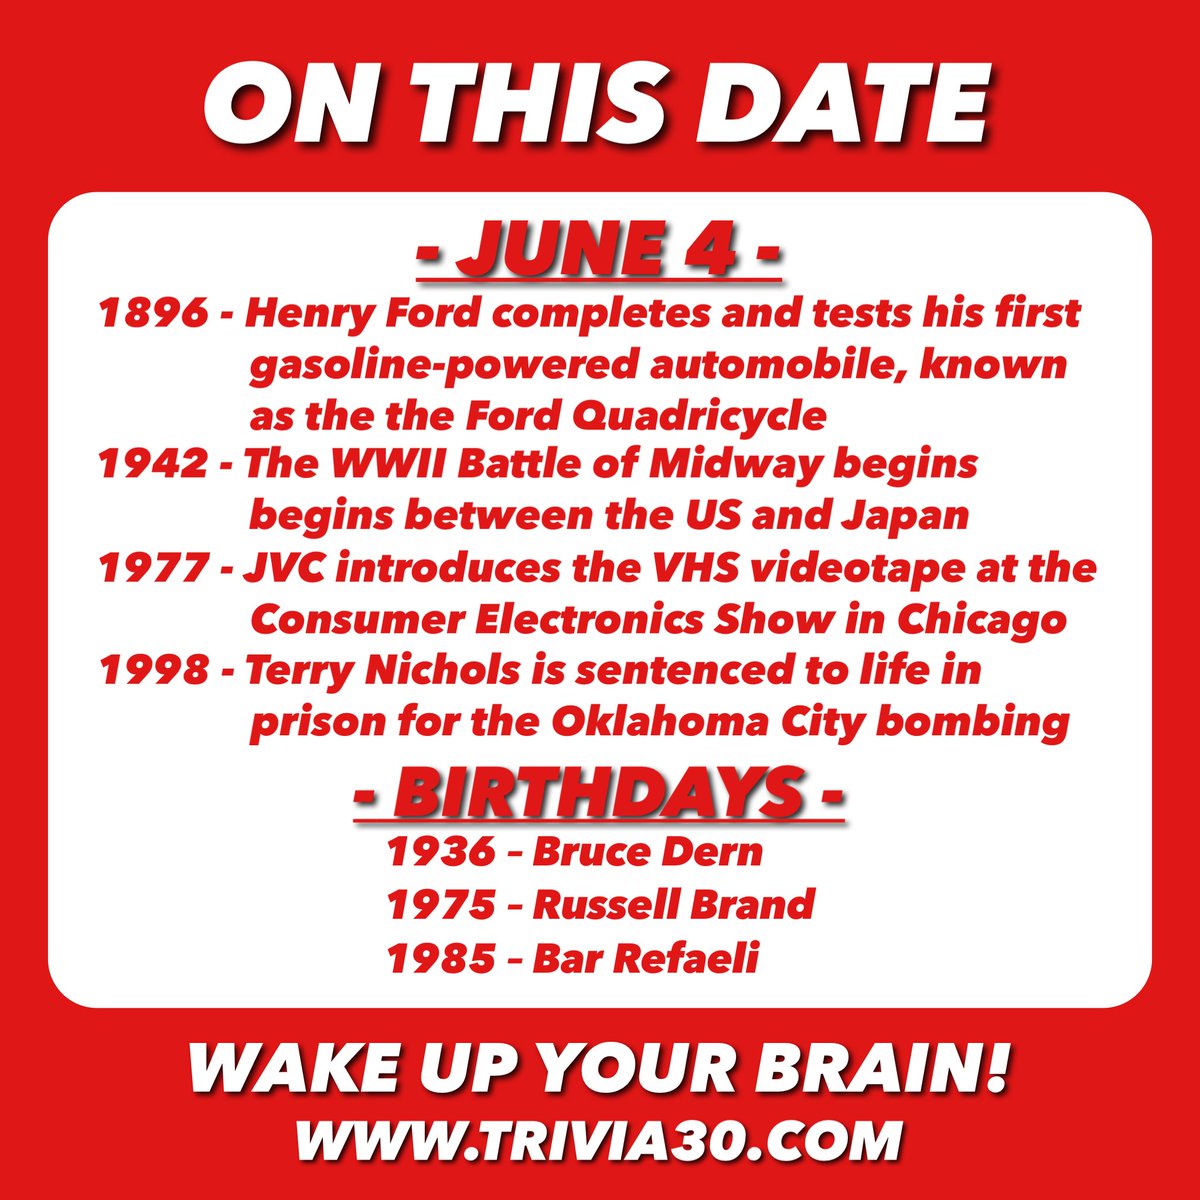 Your OTD trivia for 6/4. Join us tonight at 6:30 on Facebook Live for TRIVIA:30 Online, and have a great Sunday! #trivia30 #wakeupyourbrain #HenryFord #Ford #WWII #Midway #JVC #VHS #OKC #BruceDern #RussellBrand #BarRefaeli